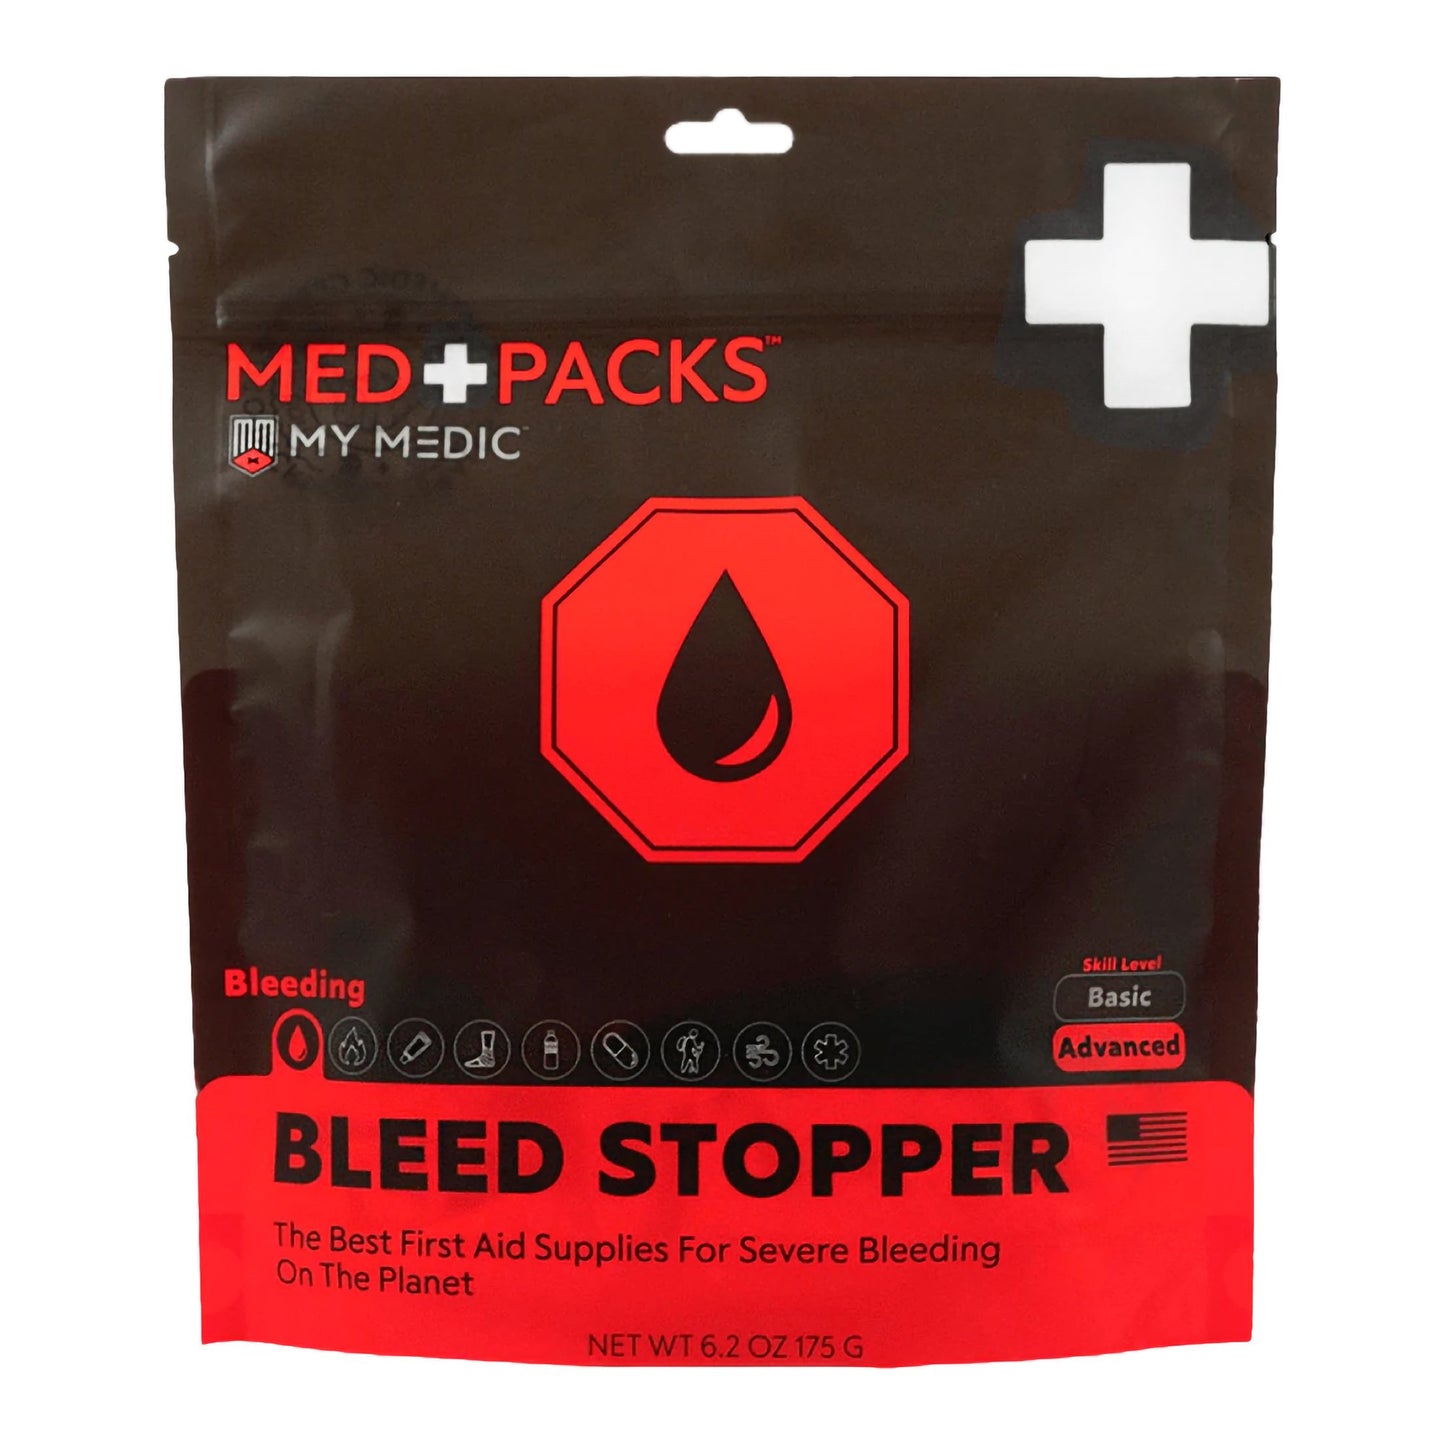 My Medic Med Packs First Aid Kit to Stop Bleeding - Emergency Supplies in Portable Pouch